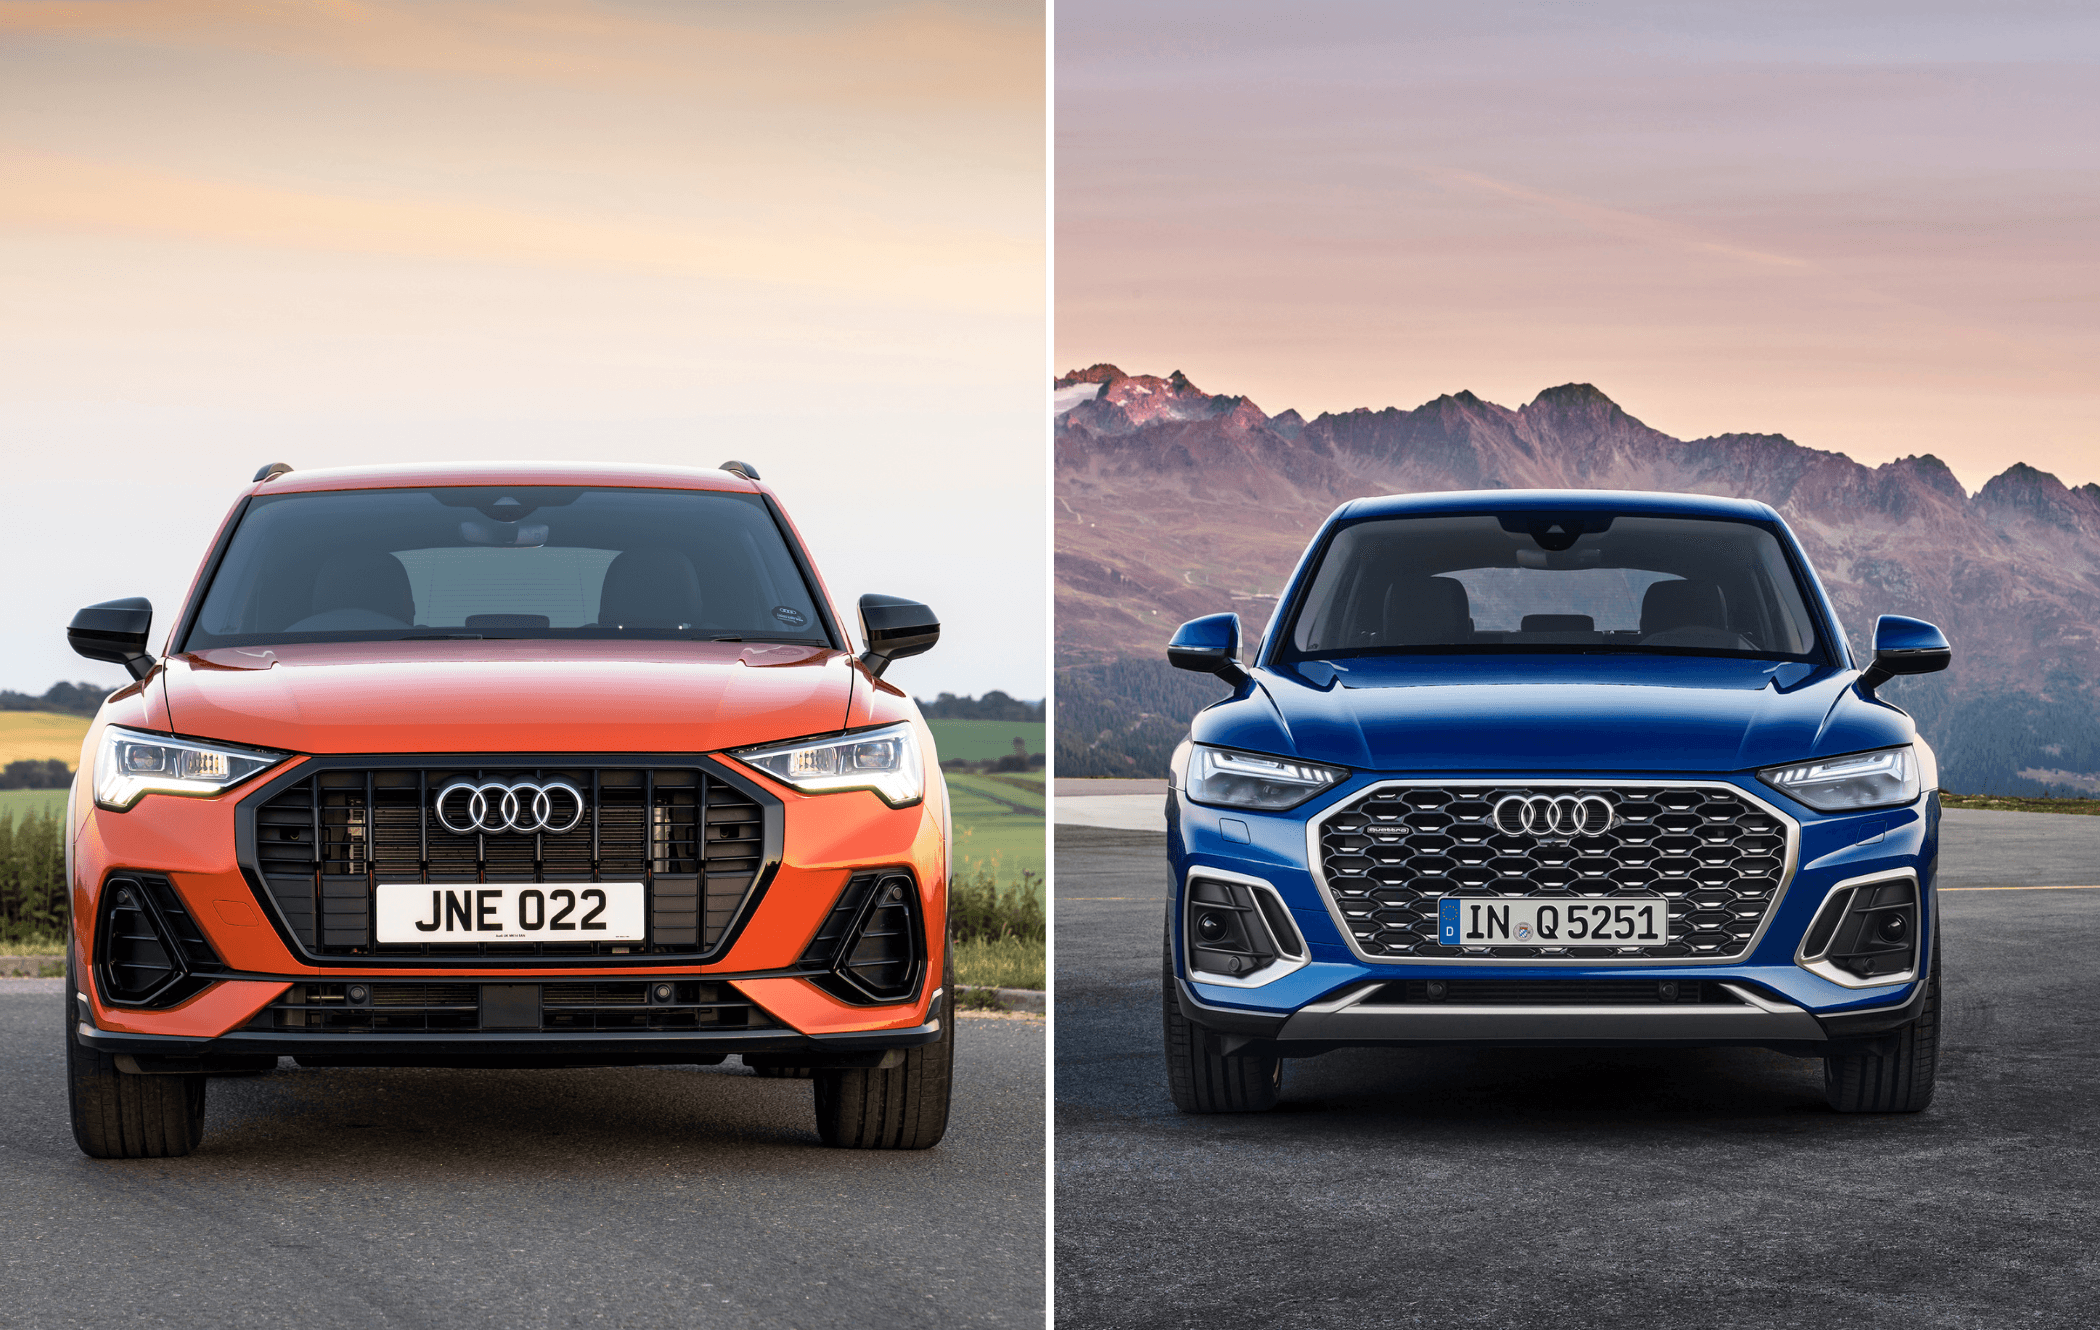 Audi Q3 vs. Q5 which is better? cinch